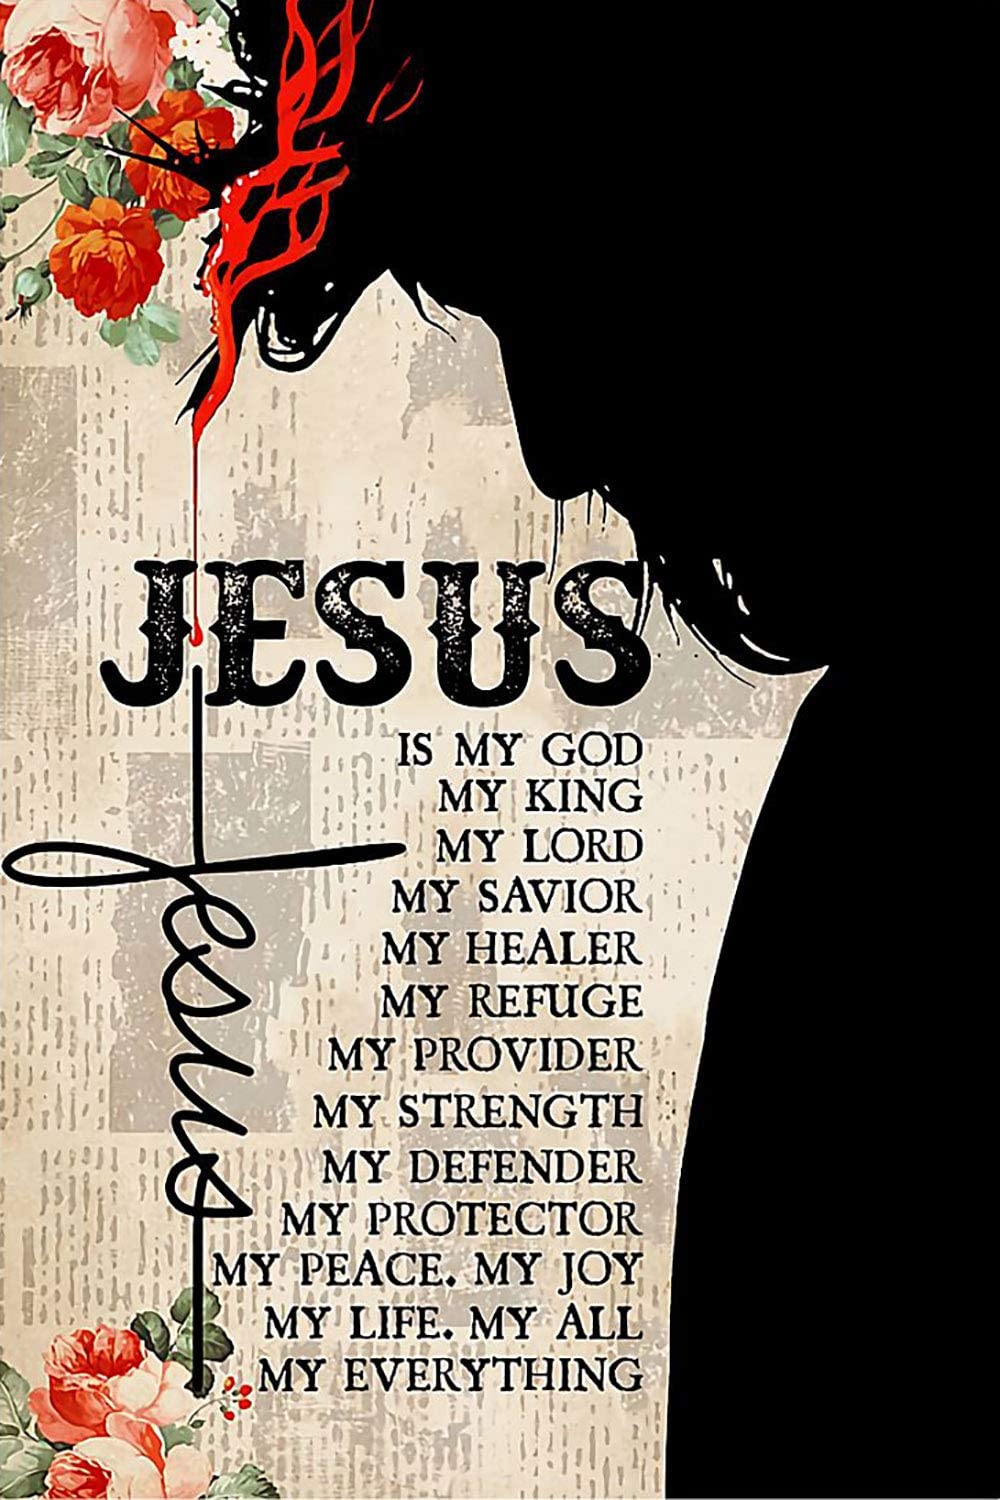 Skitongifts Poster No Frame, Wall Art, Home Decor Christian Jesus Jesus Is My Everything With Silhouette Of Jesus On Flower Wall GP2810